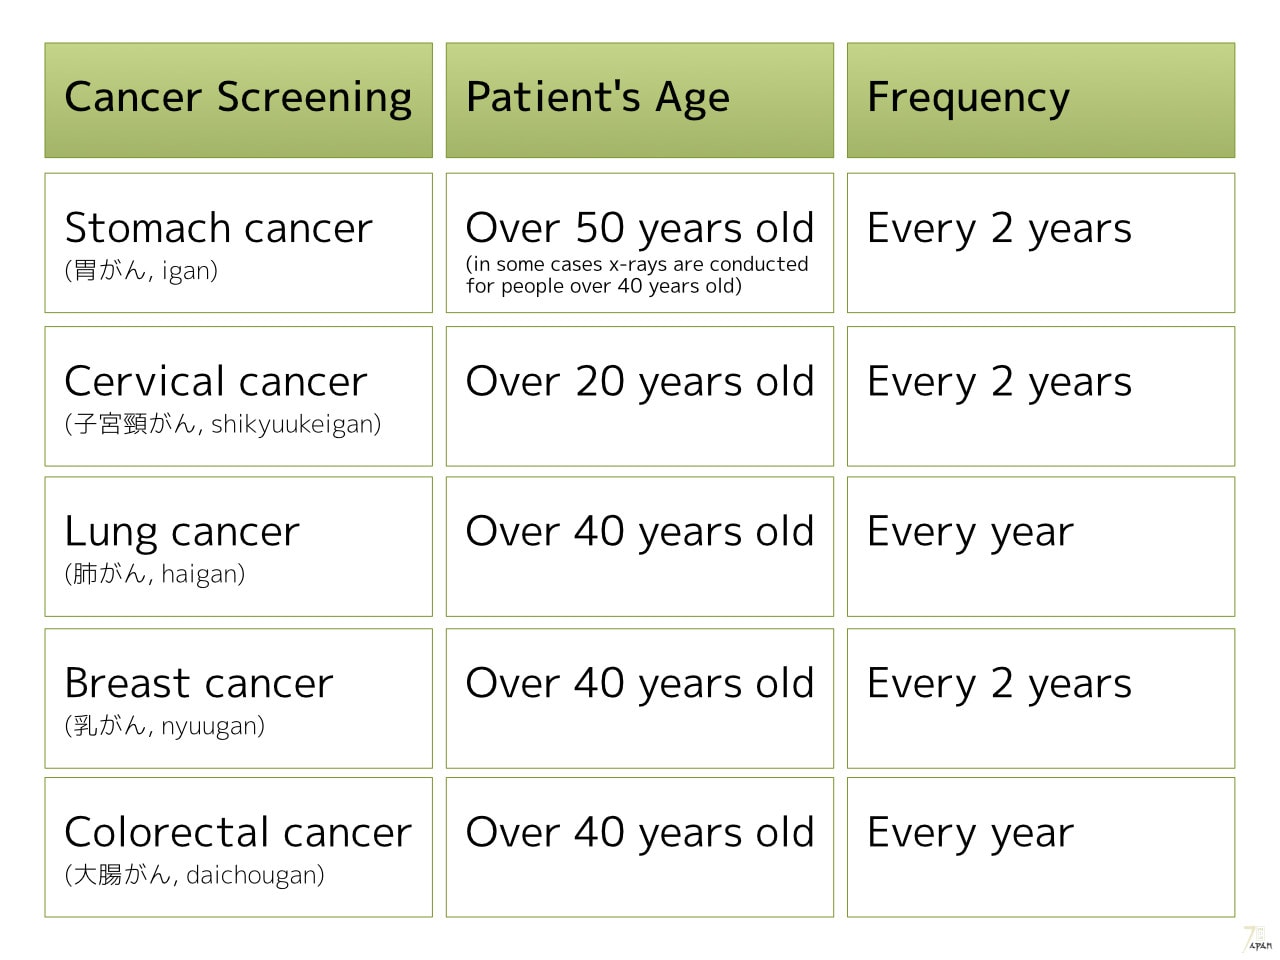 Free cancer screening available in Japan